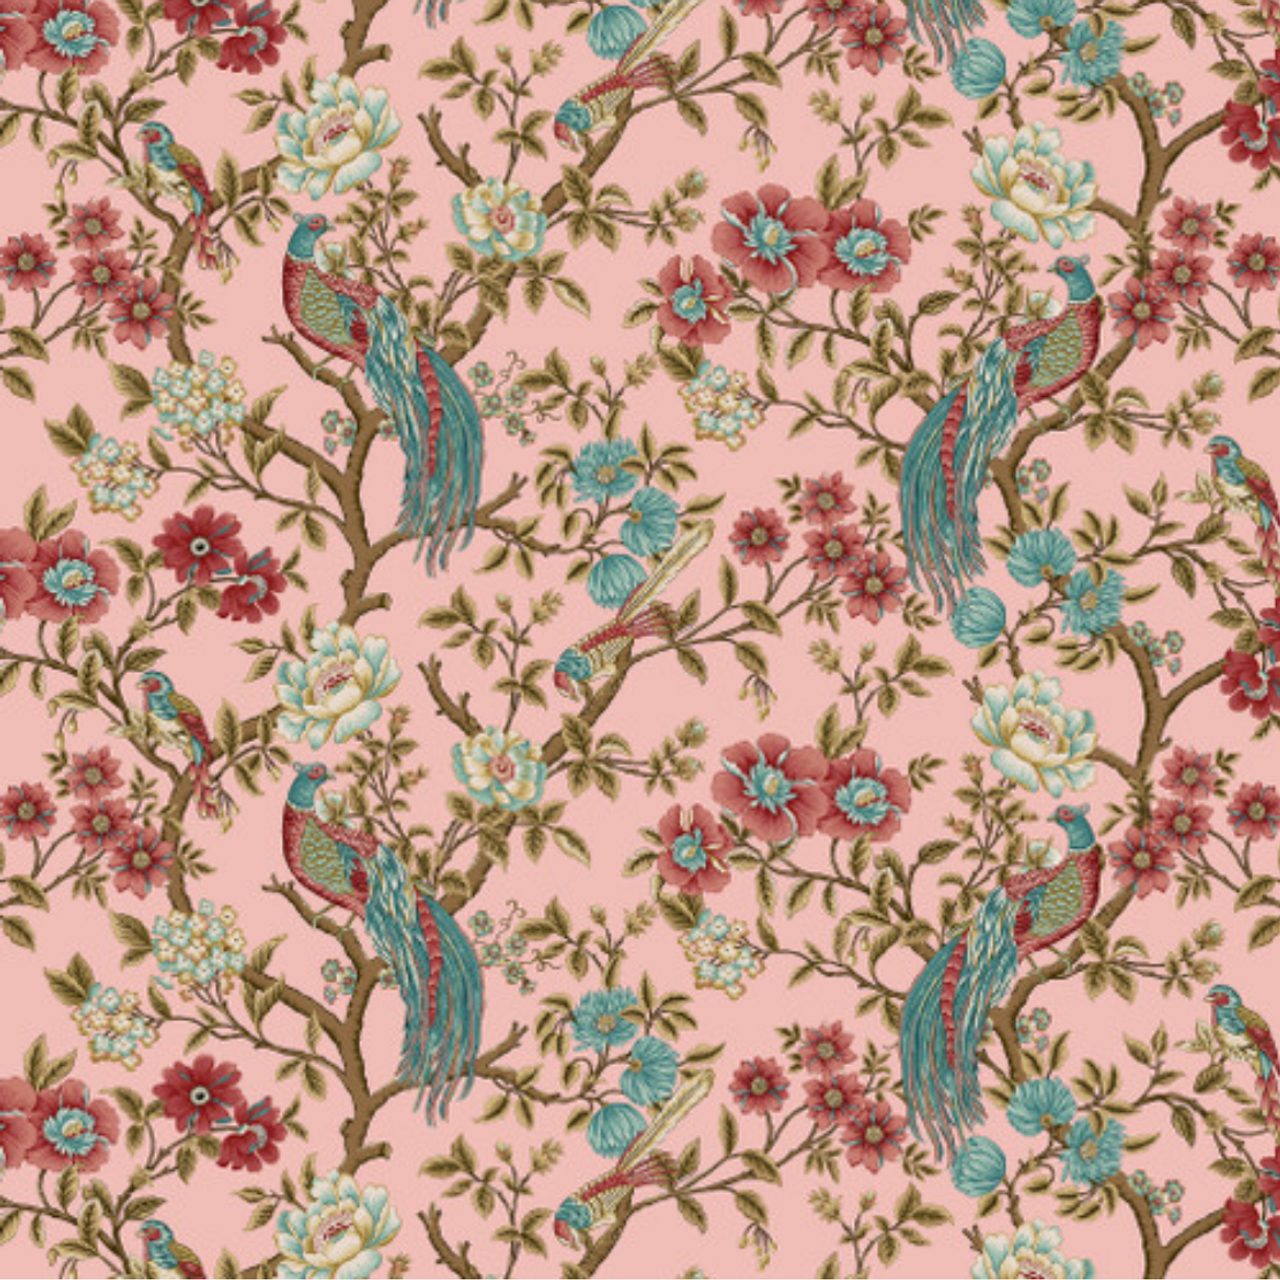 Henry Glass Lille Main Bird Floral Pink Cotton Fabric By The Yard